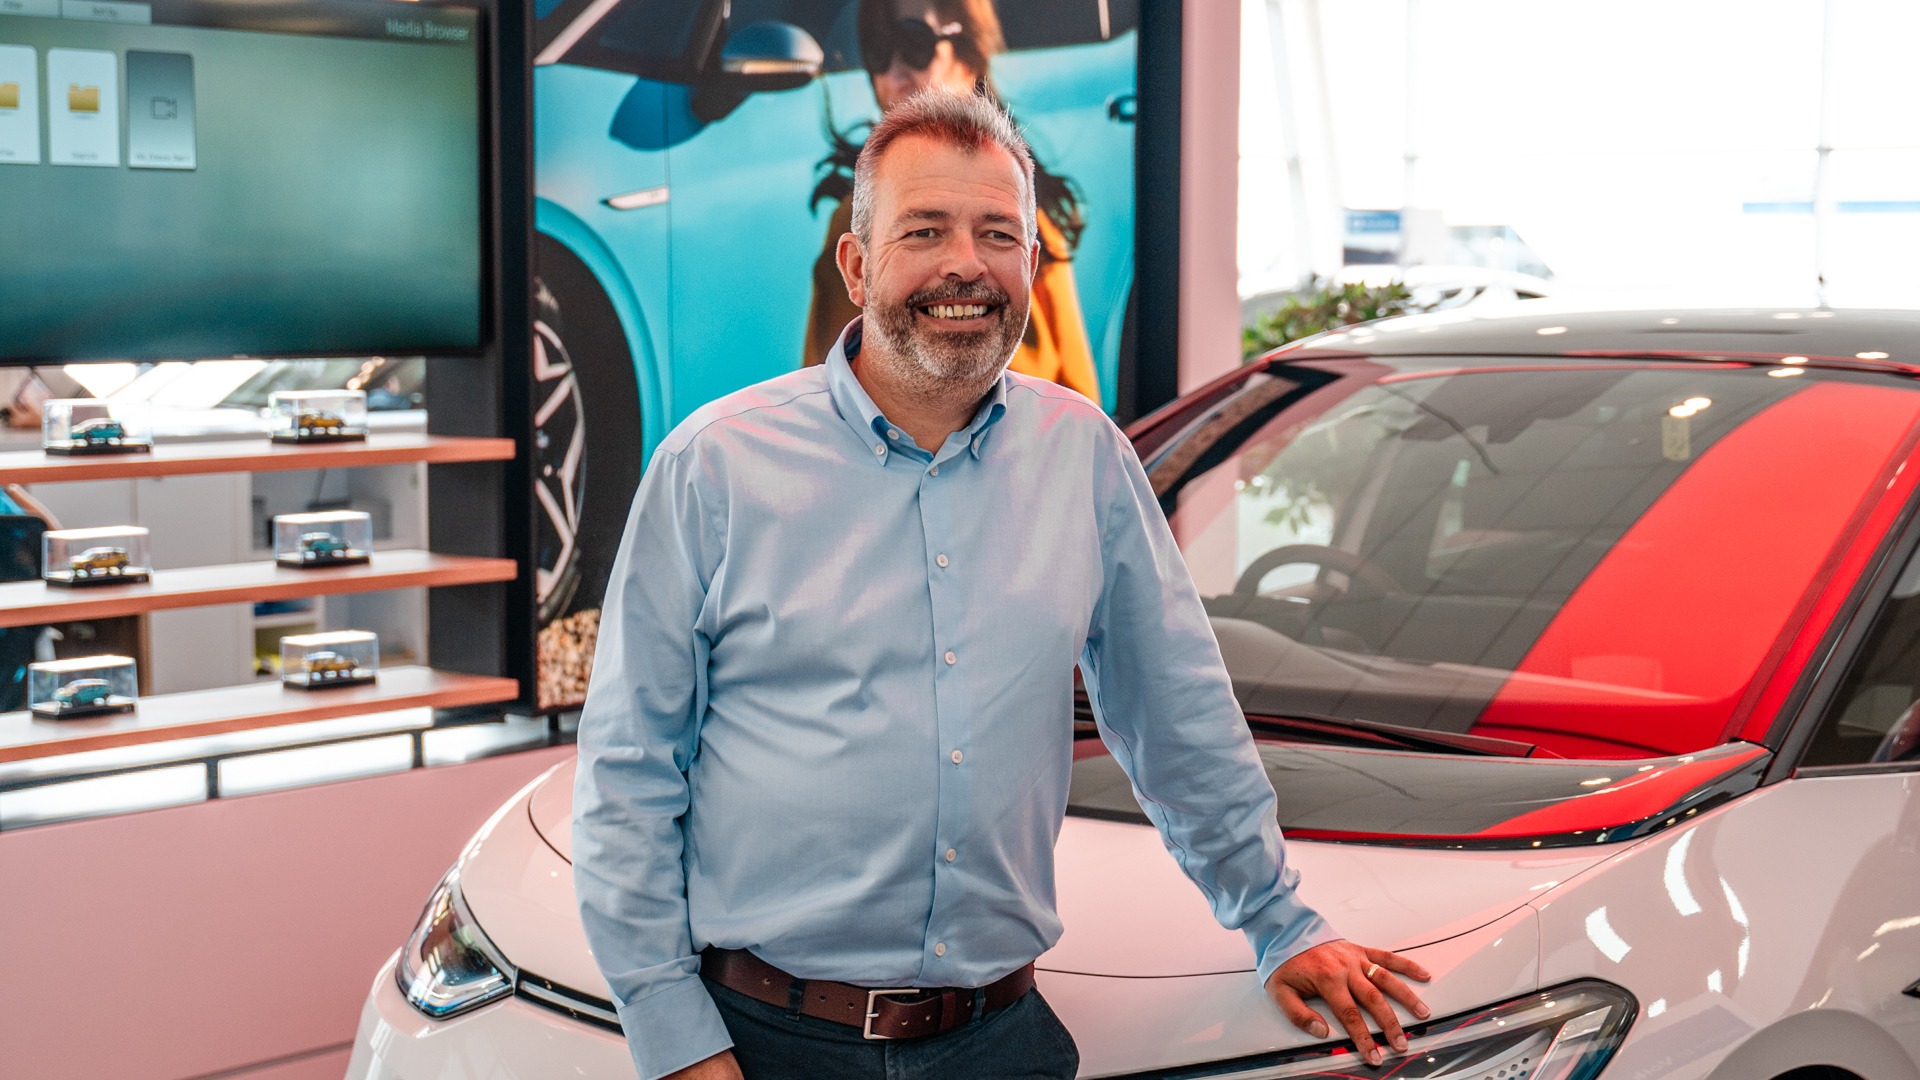 Sam Patterson joins Breeze to drive business fleet solutions forward